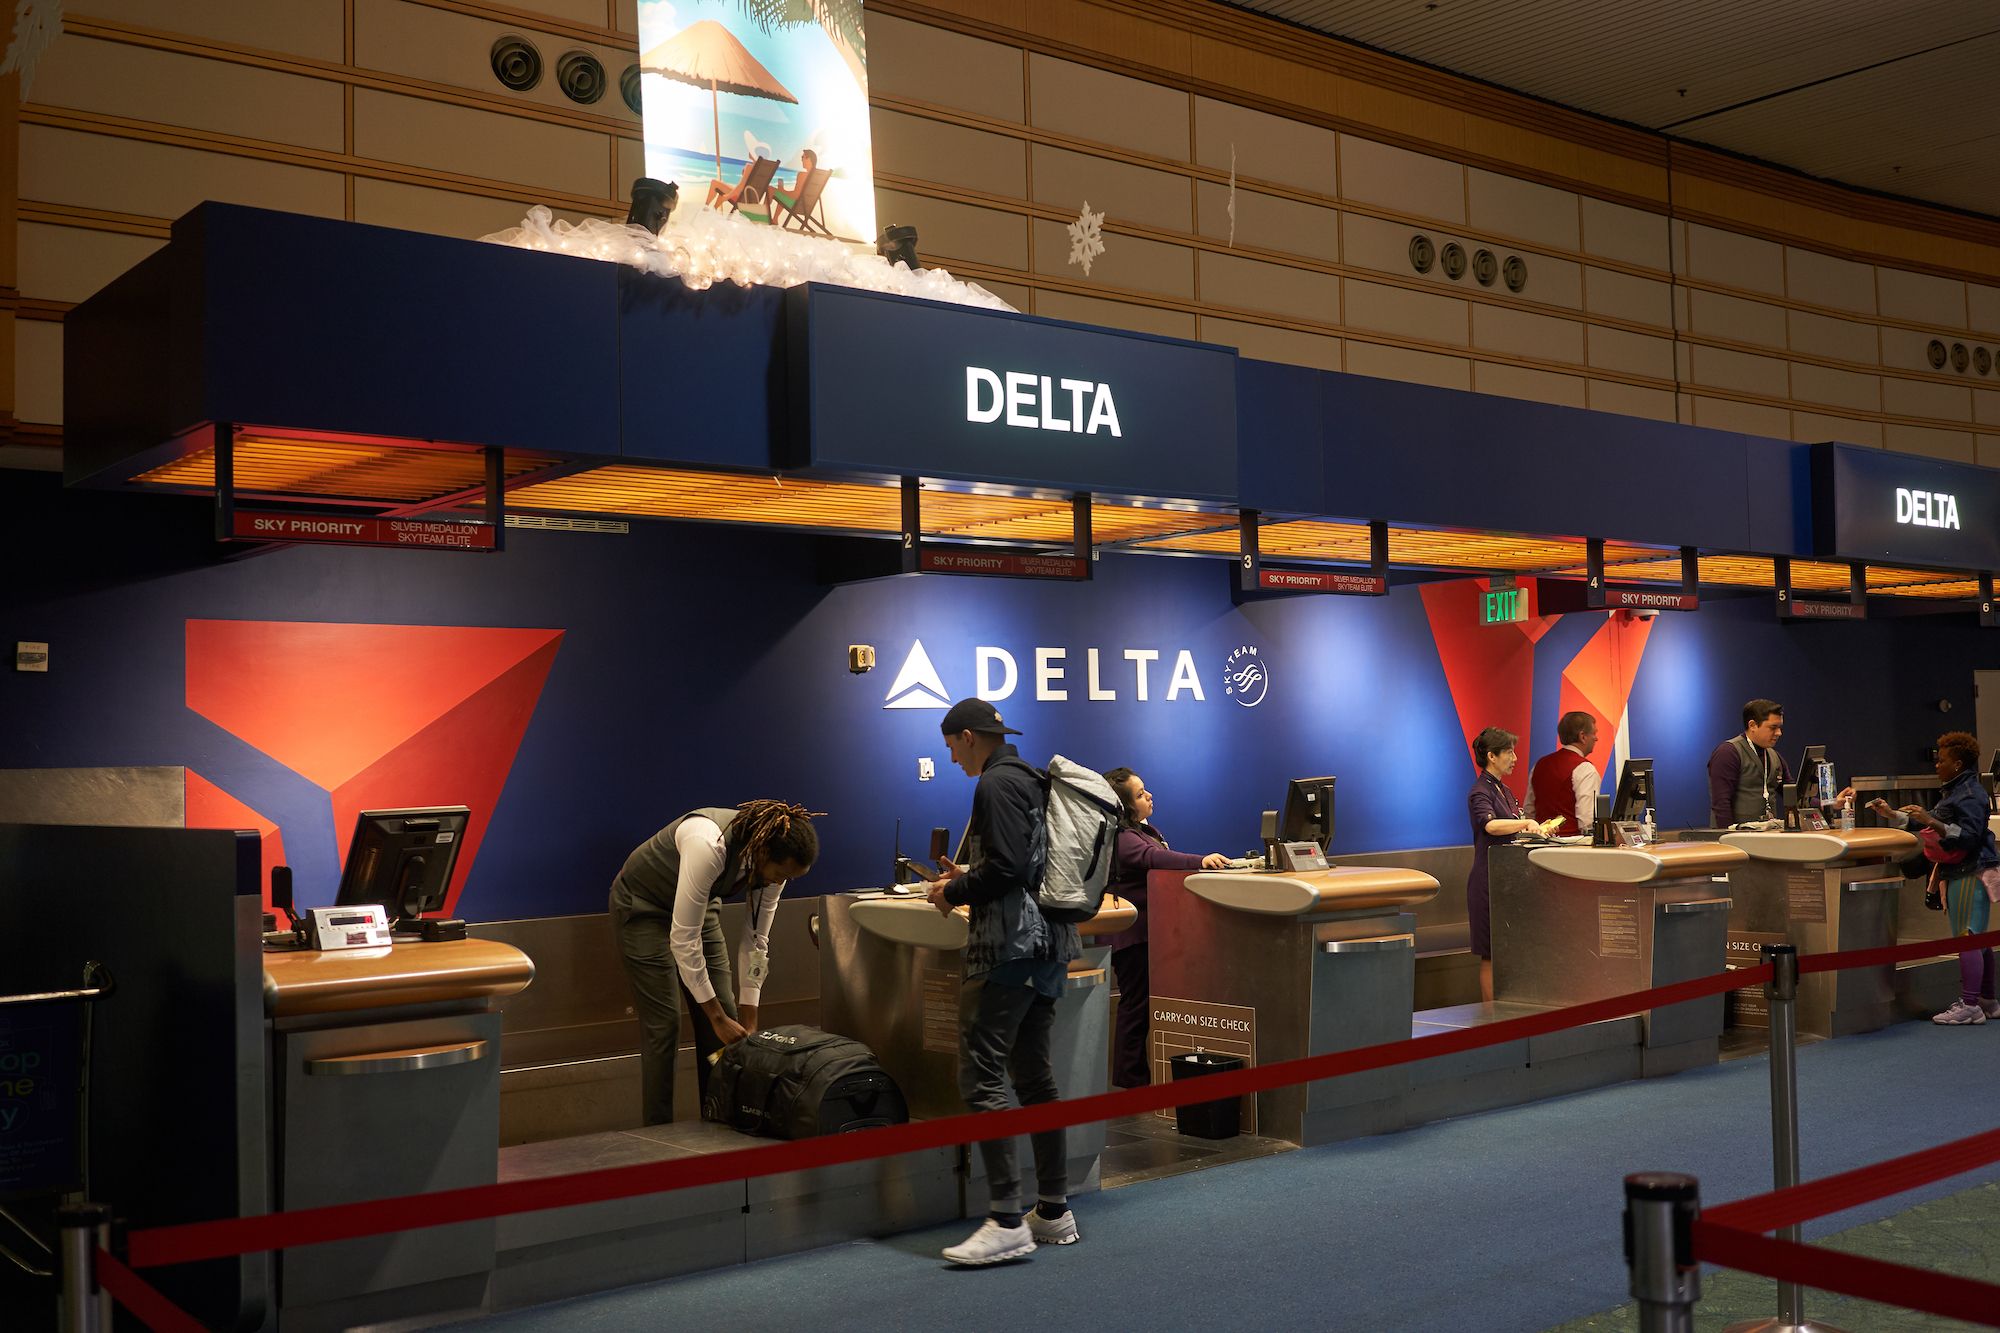 Delta Air Lines check-in gates at Portland International Airport PDX